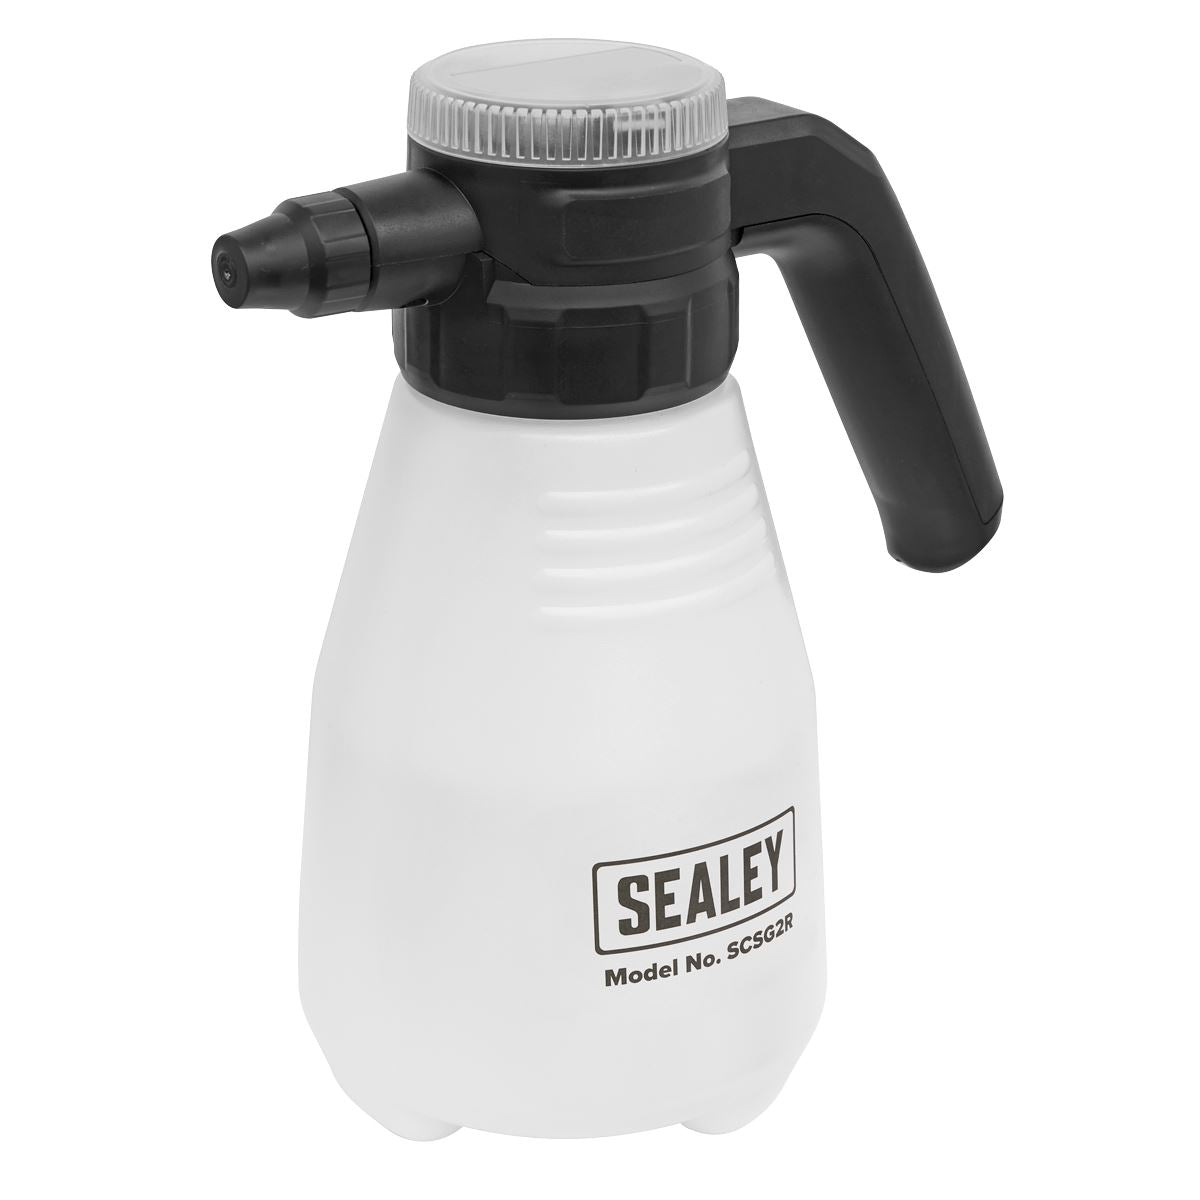 Sealey Rechargeable Pressure Sprayer 2L